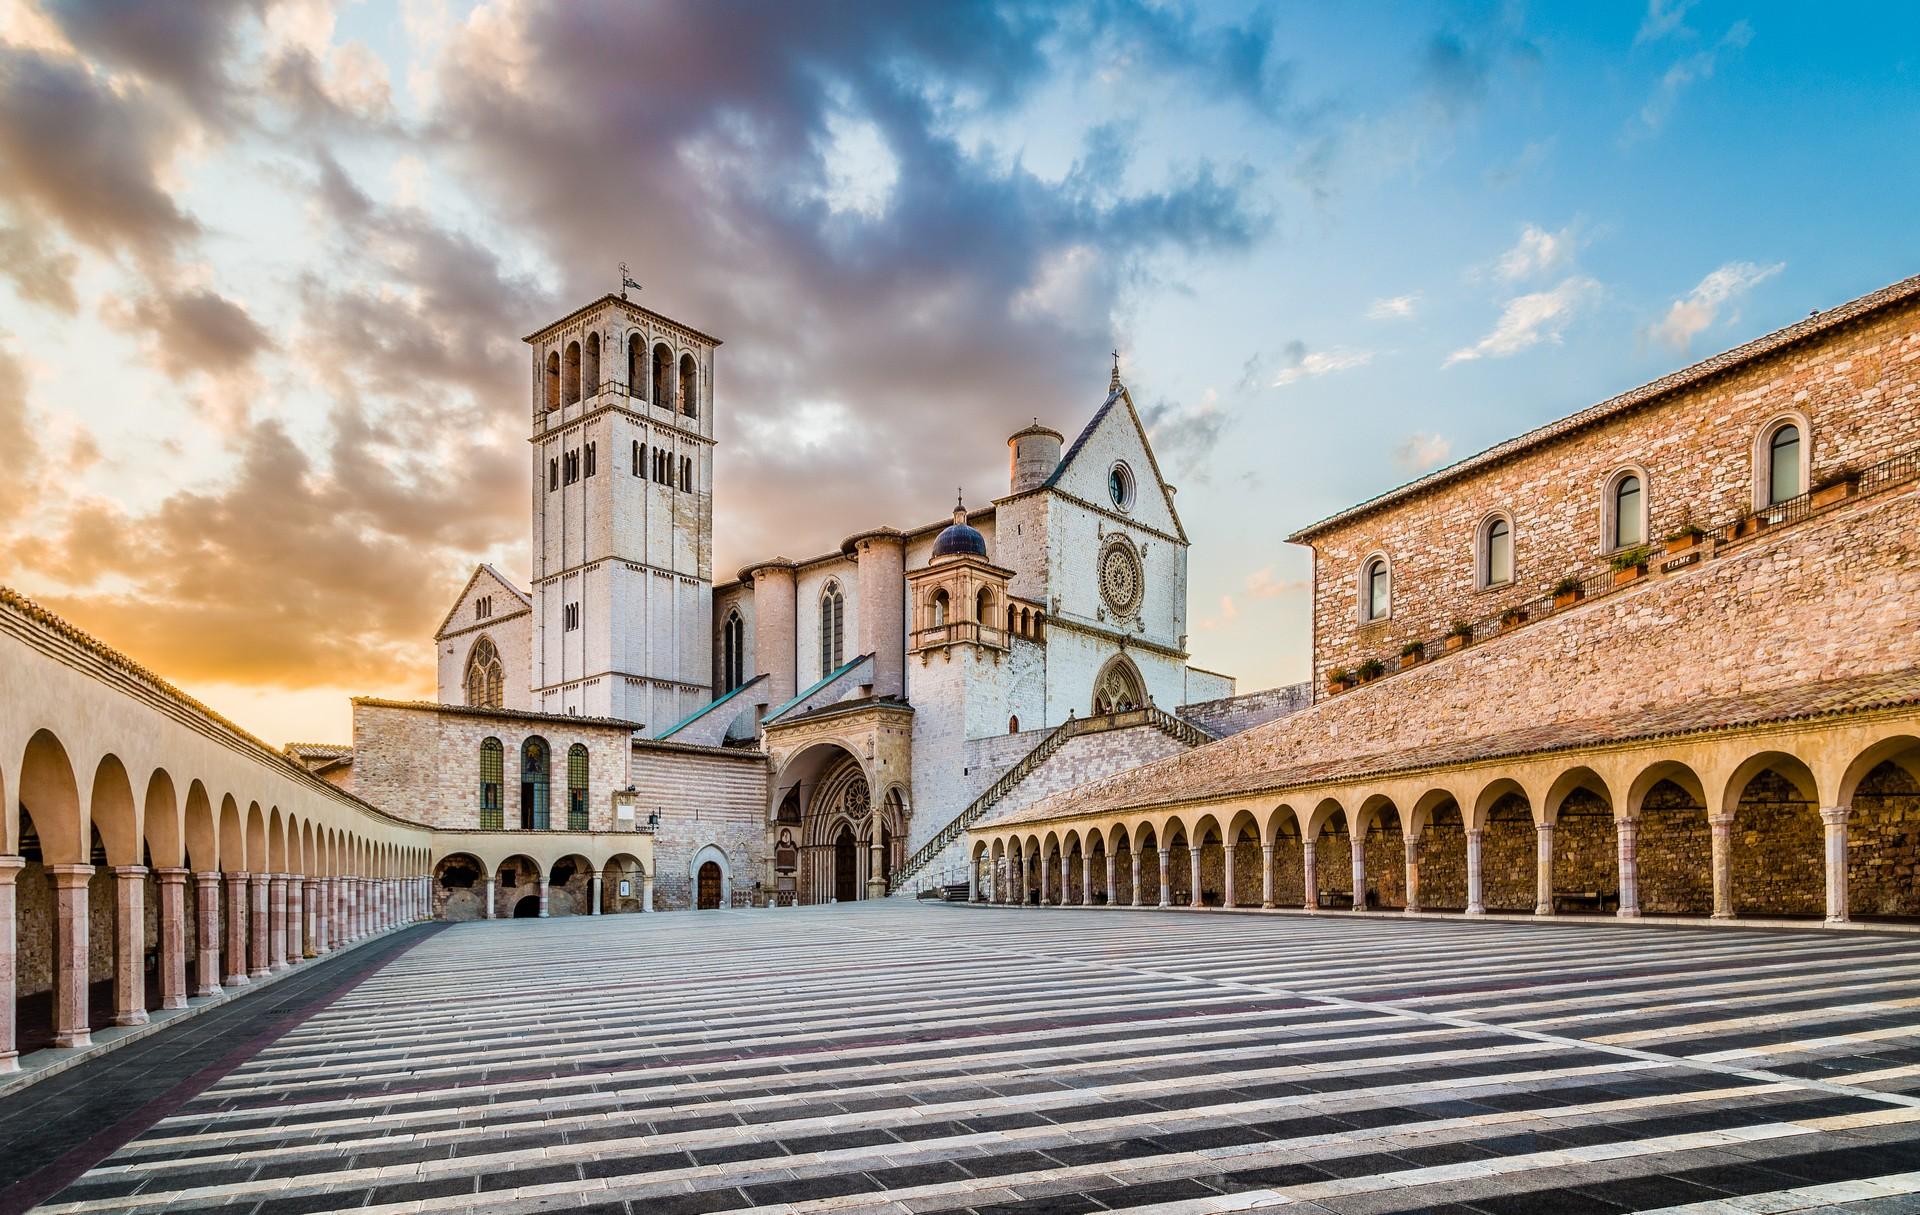 Architecture in Assisi at sunset time